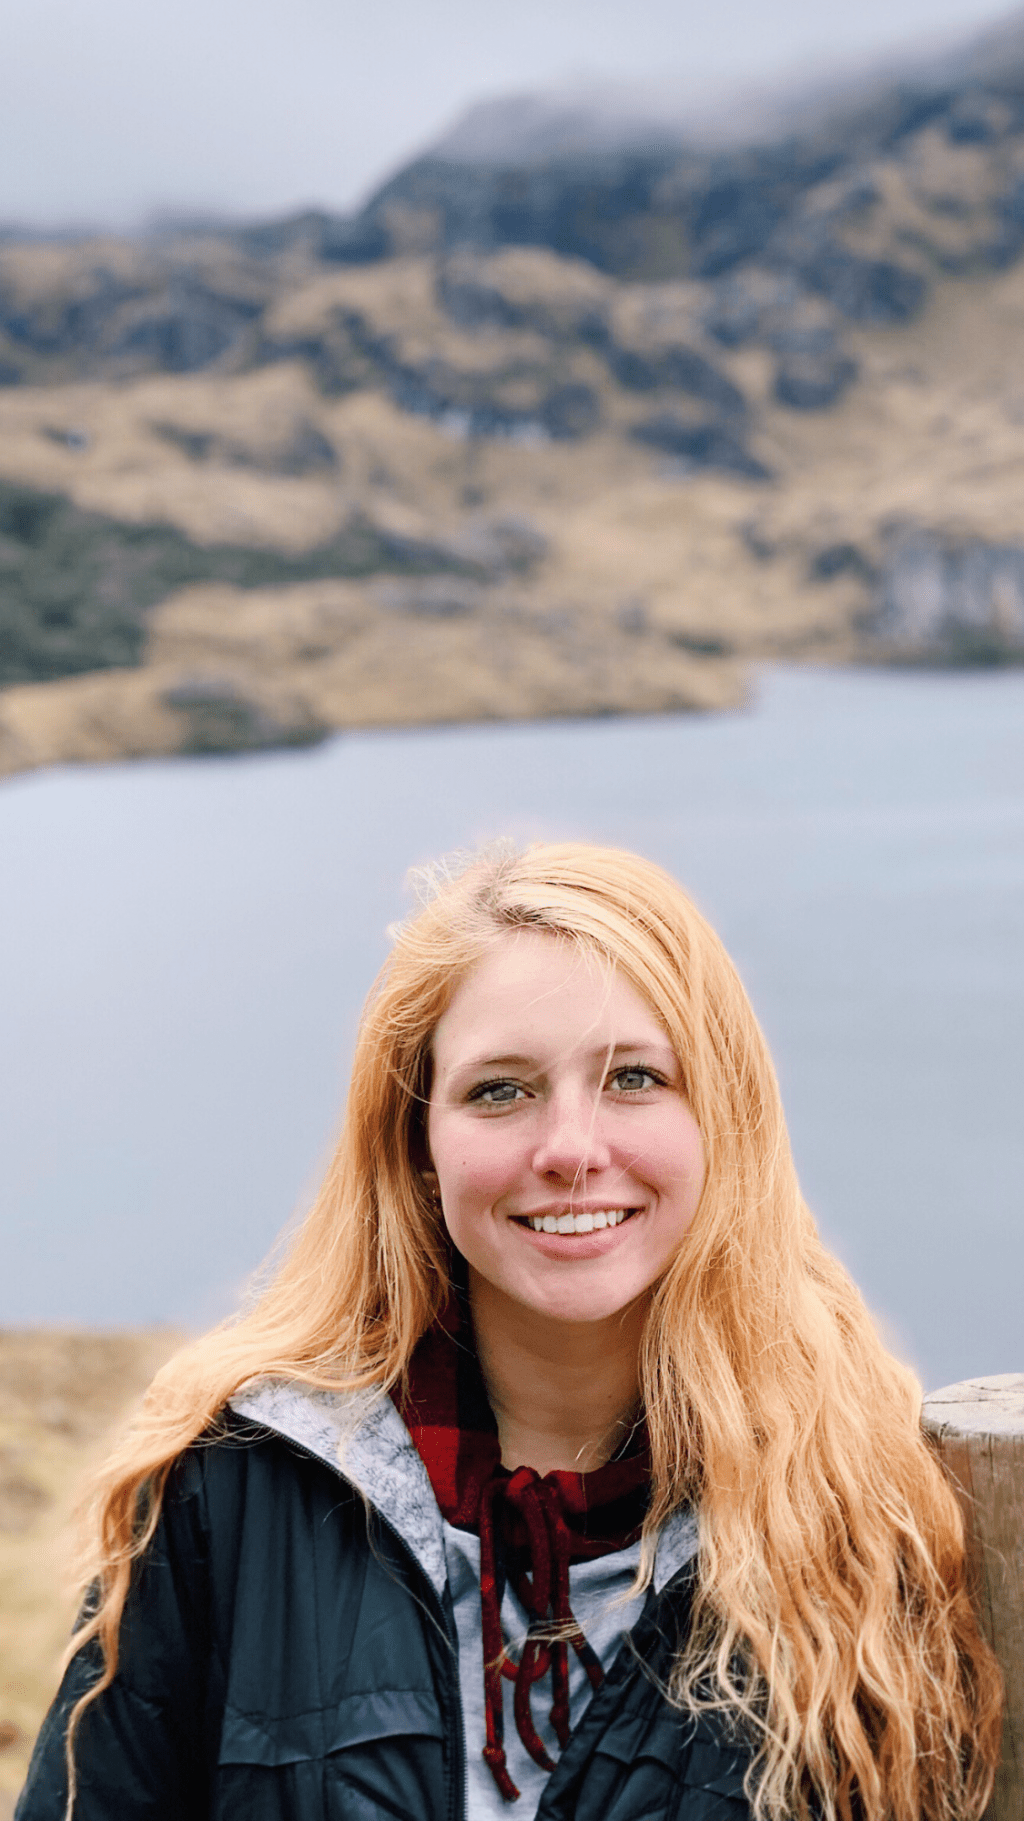 Cannon poses in Cajas, a national park in Ecuador. She visited her family in the country for the summer, as she is originally from Ecuador and moved to the United States when she was young.